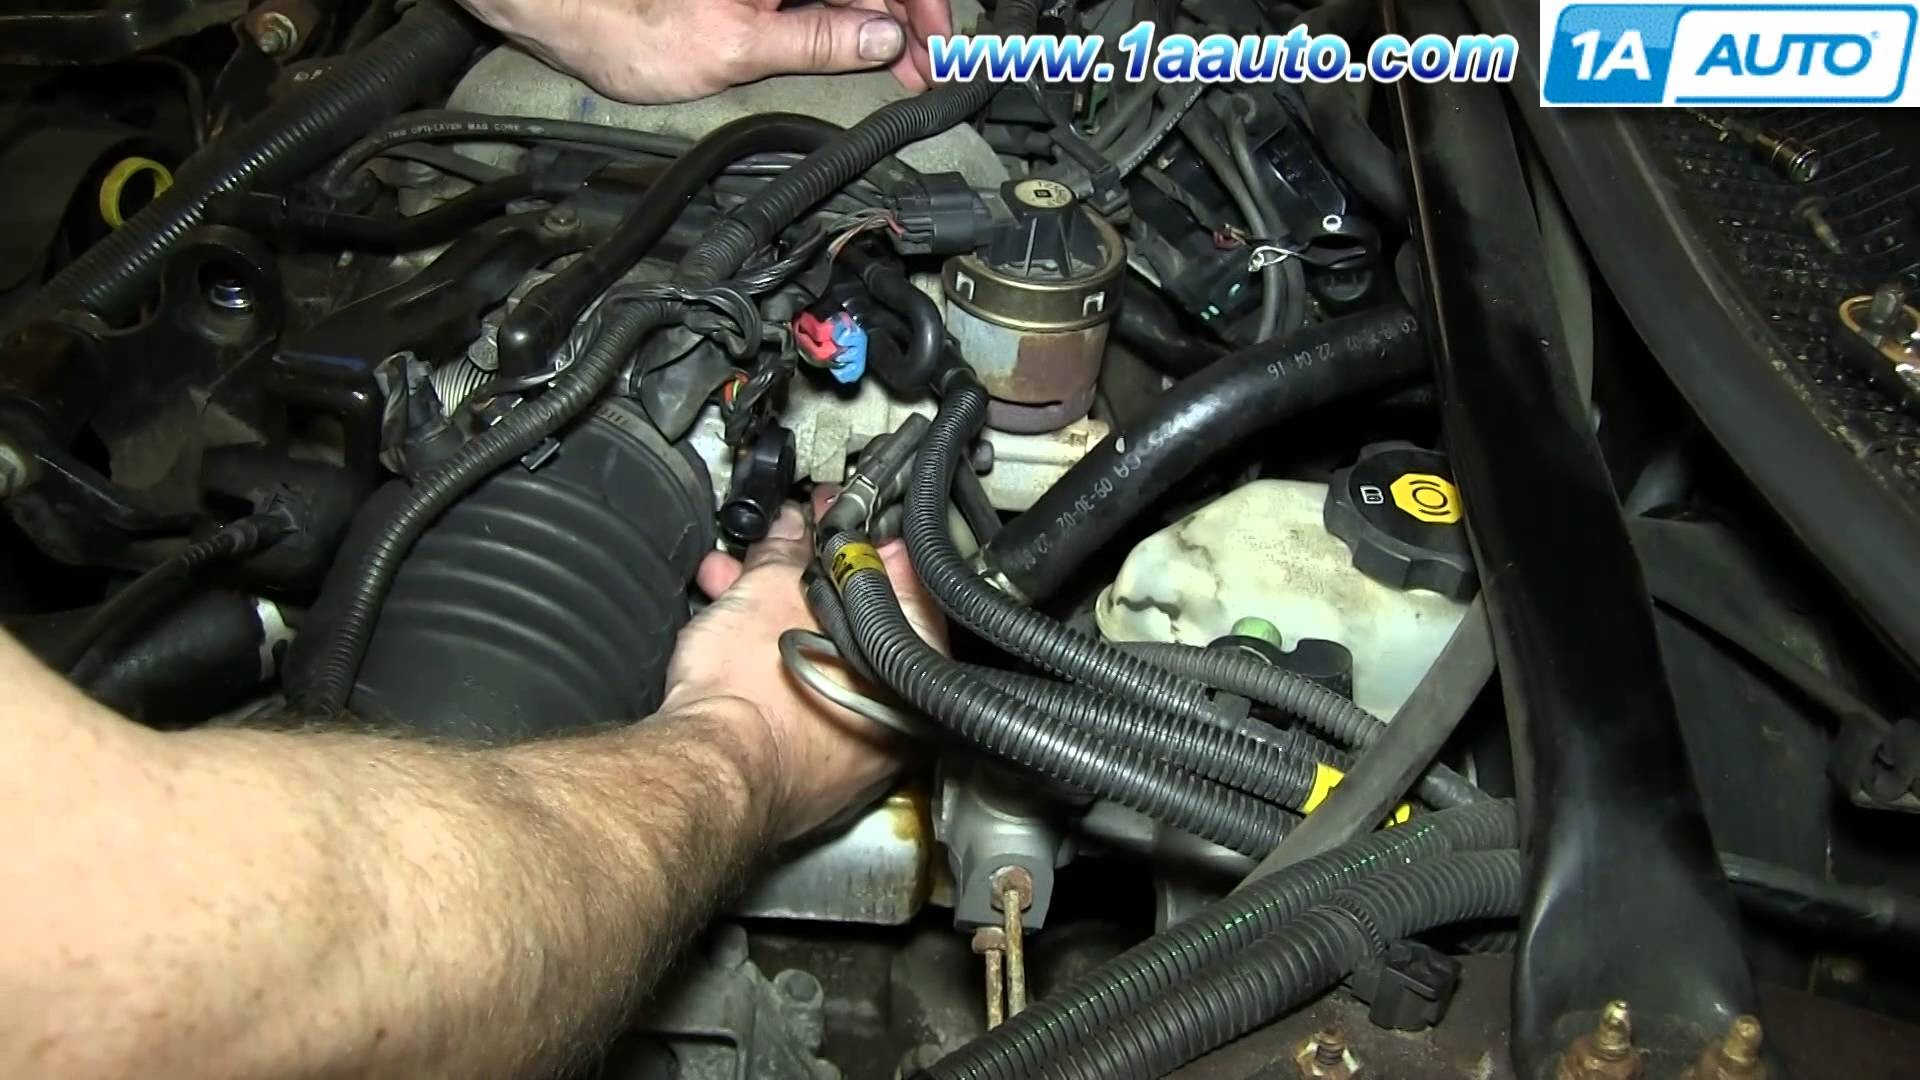 Chevy Venture Engine Diagram How to Install Replace Tps Throttle Position Sensor 3 4l Chevy Monte Of Chevy Venture Engine Diagram